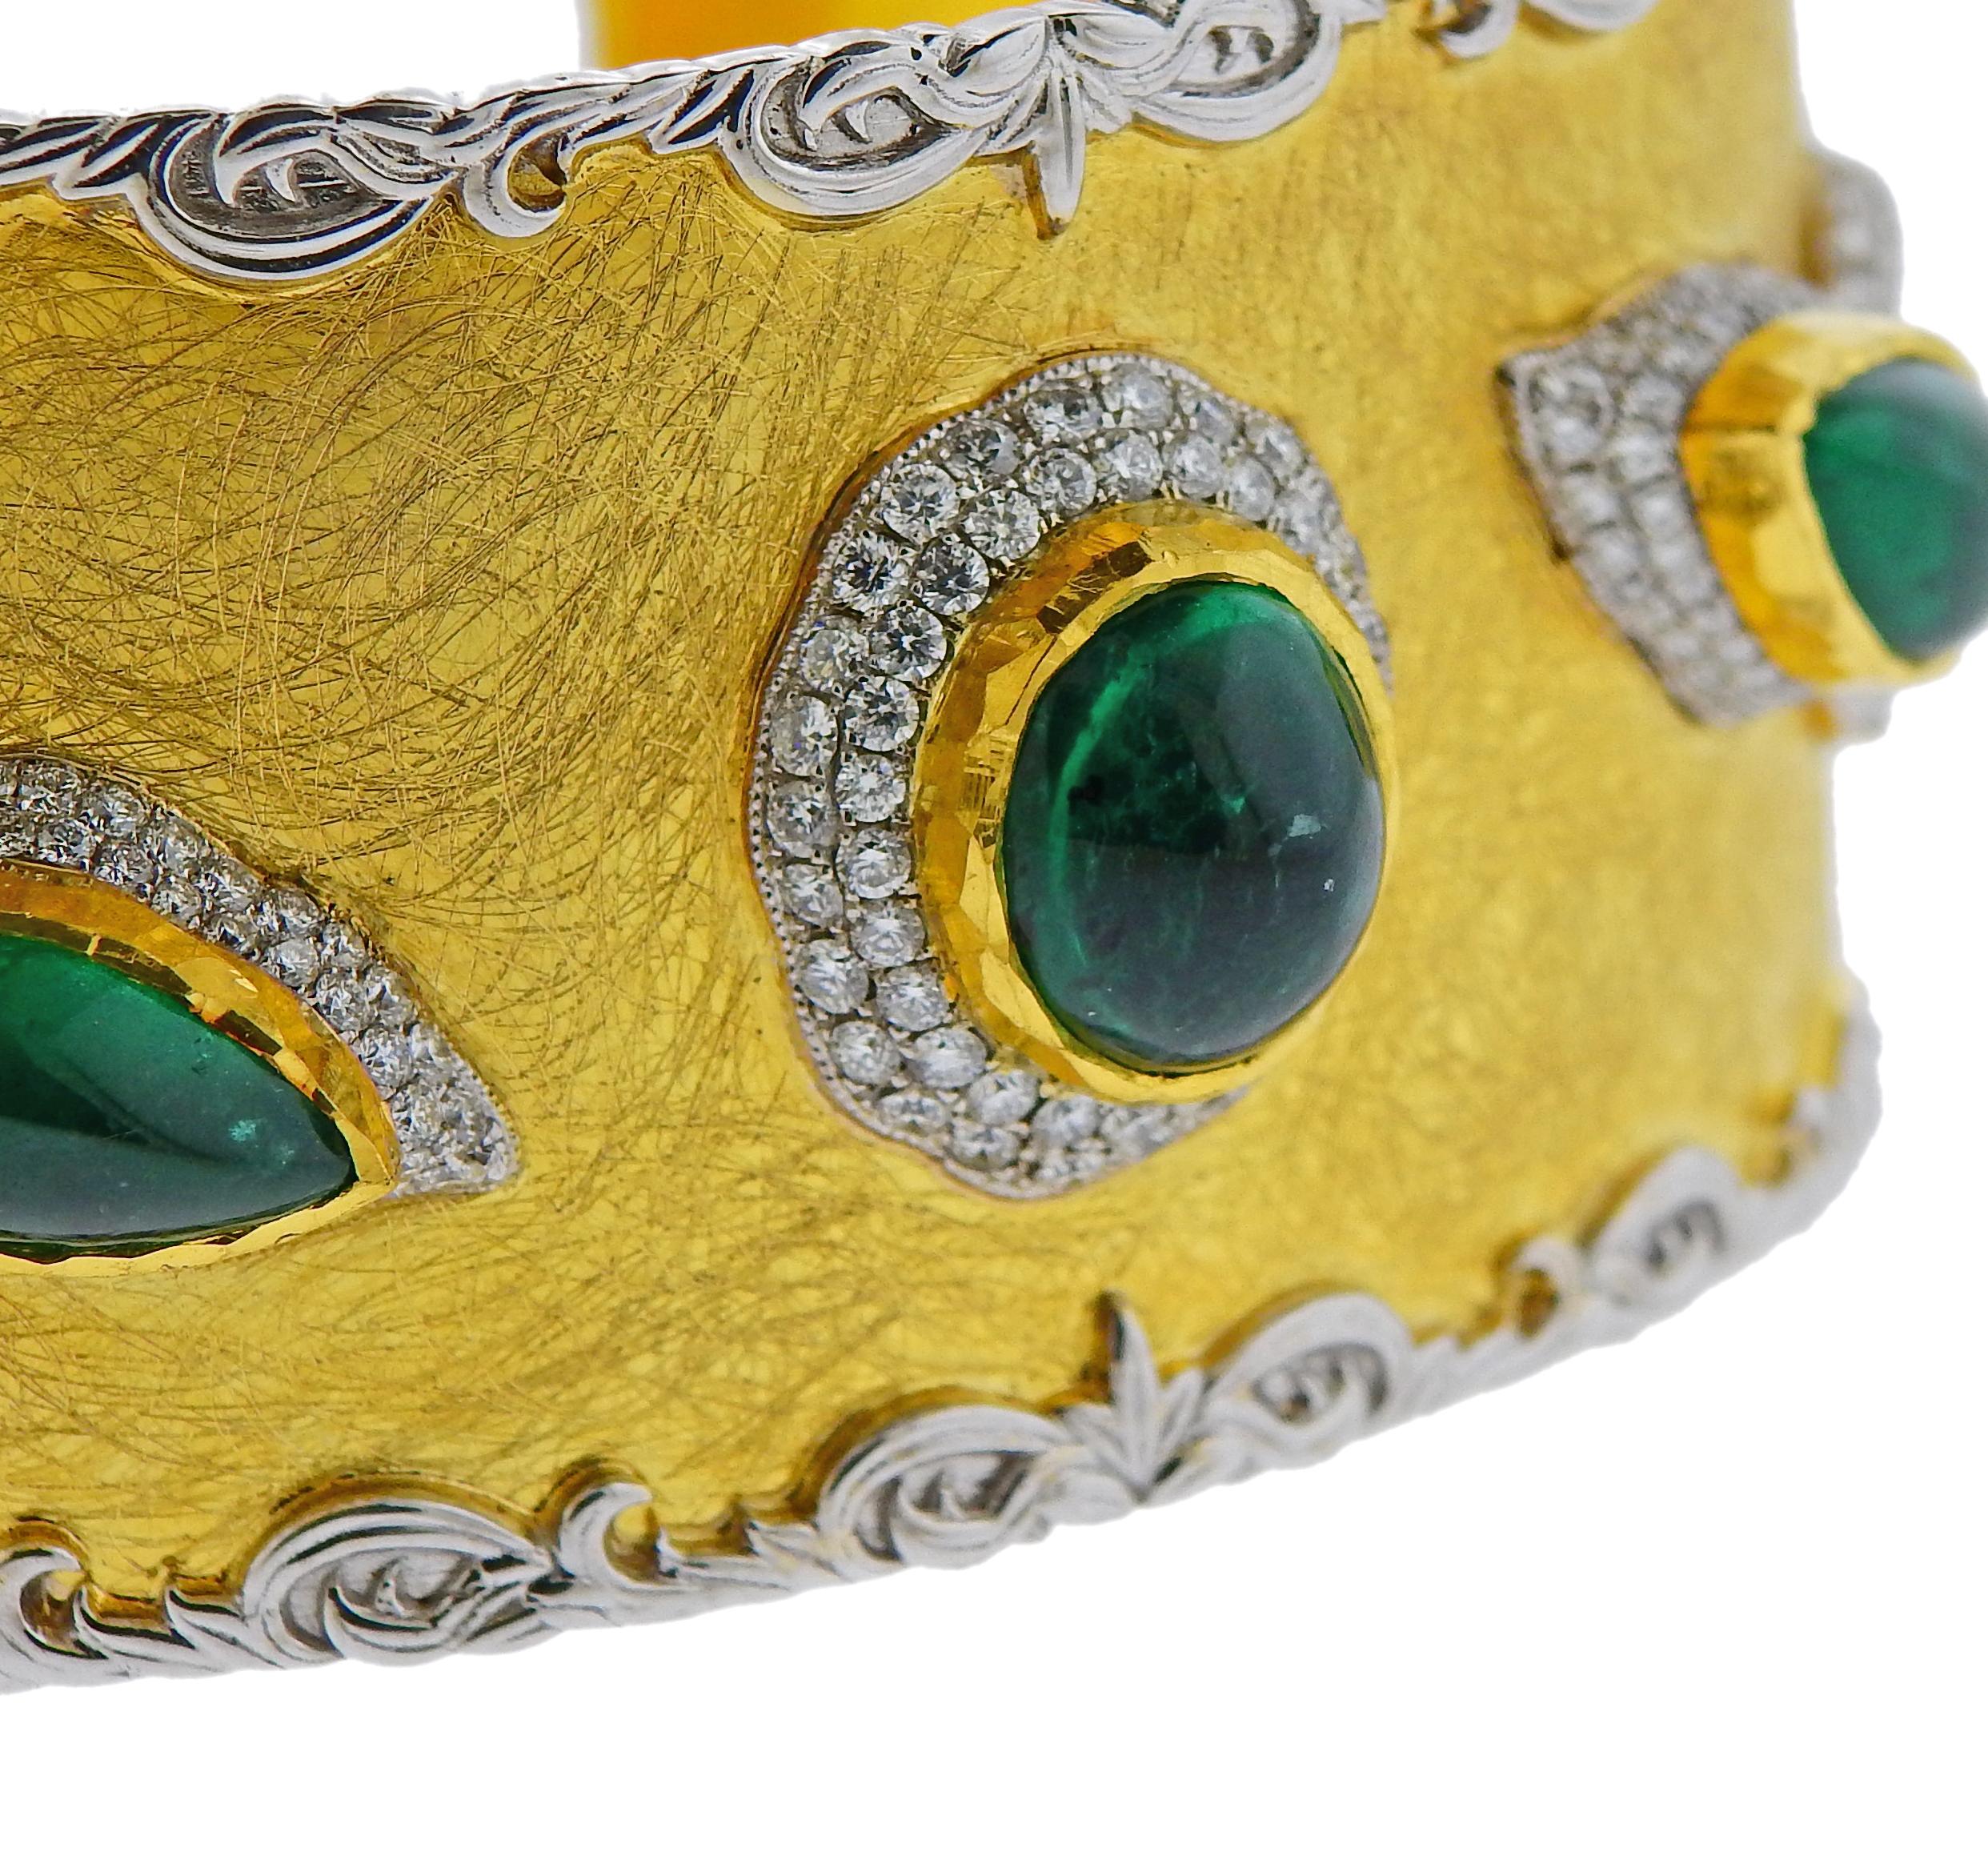 Impressive 18k and 24k gold cuff bracelet by Victor Velyan, set with emerald cabochons and approx. 1.80ctw in diamonds. Approximate retail is $68000. Bracelet will fit approx. 7.5